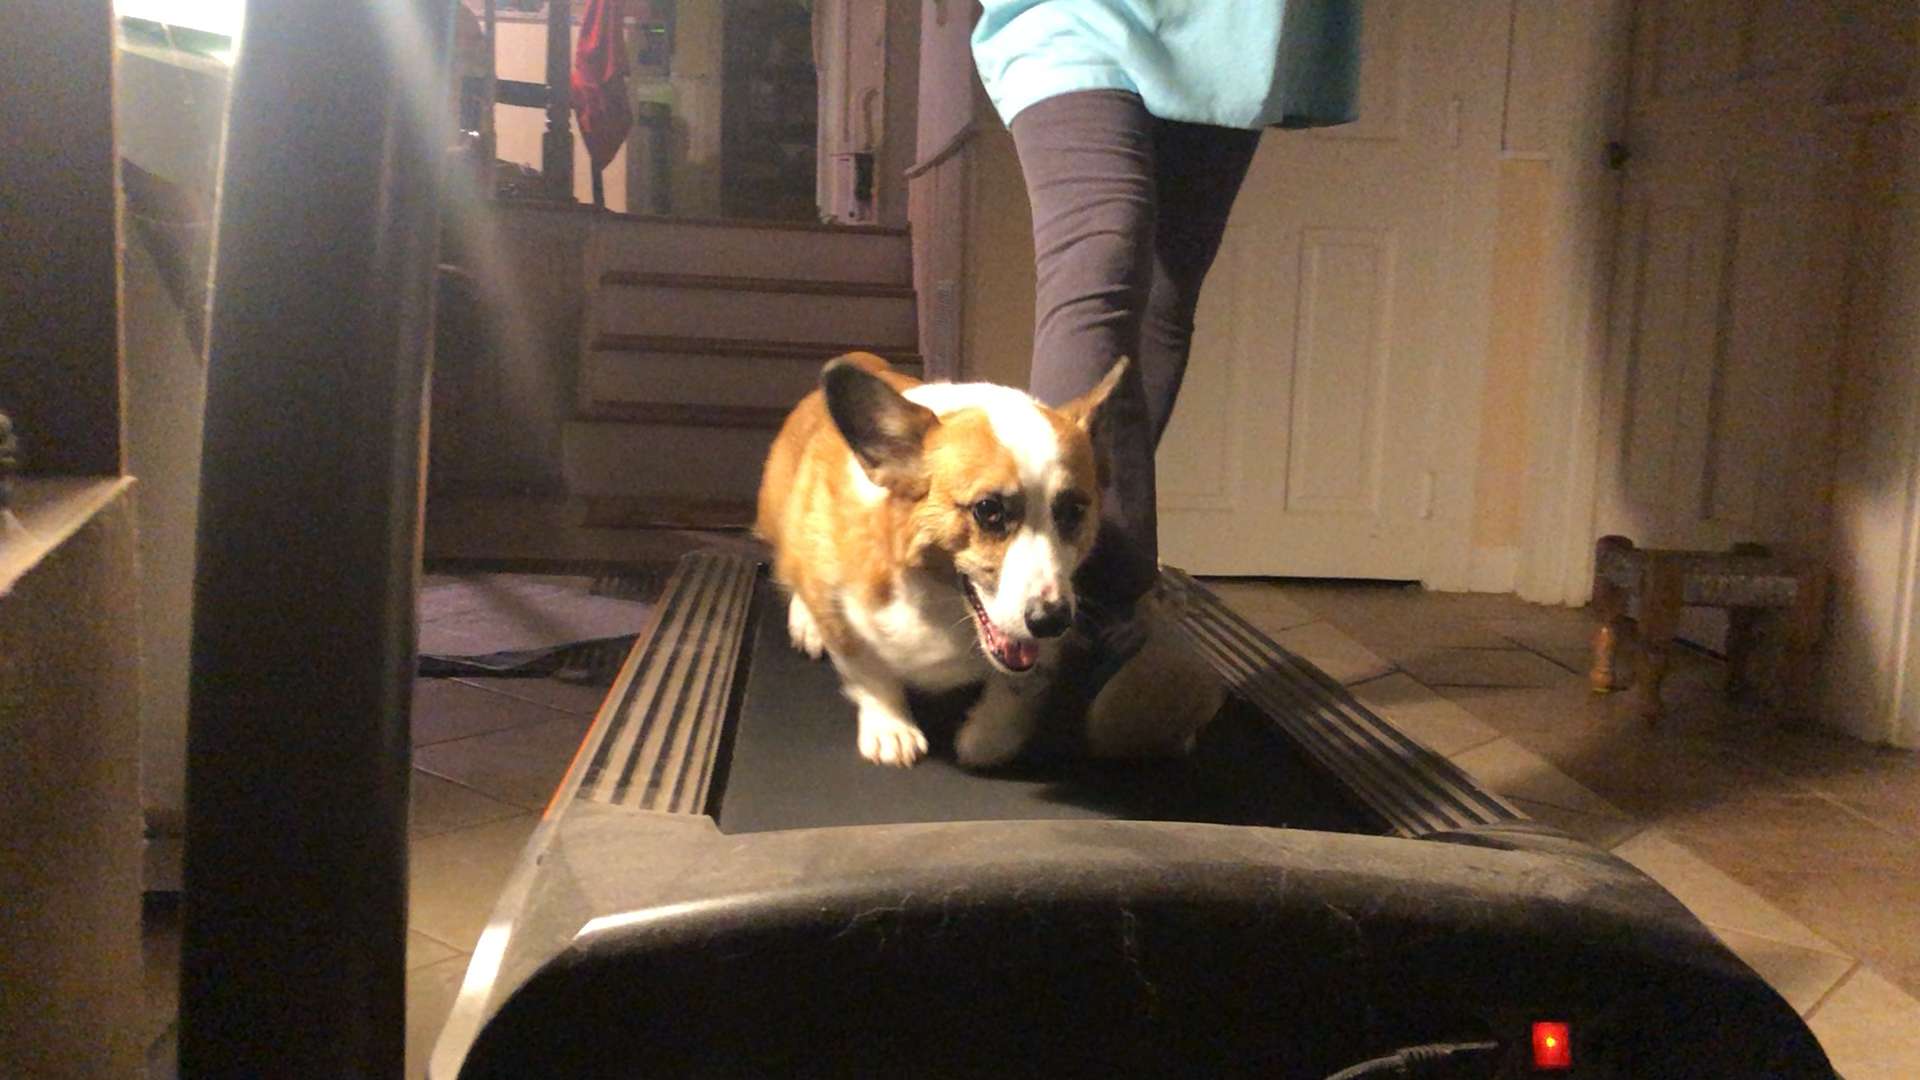 image for How to keep a corgi from getting fat. Doctors orders saying he needs more exercise. He loves the treadmill. : corgi